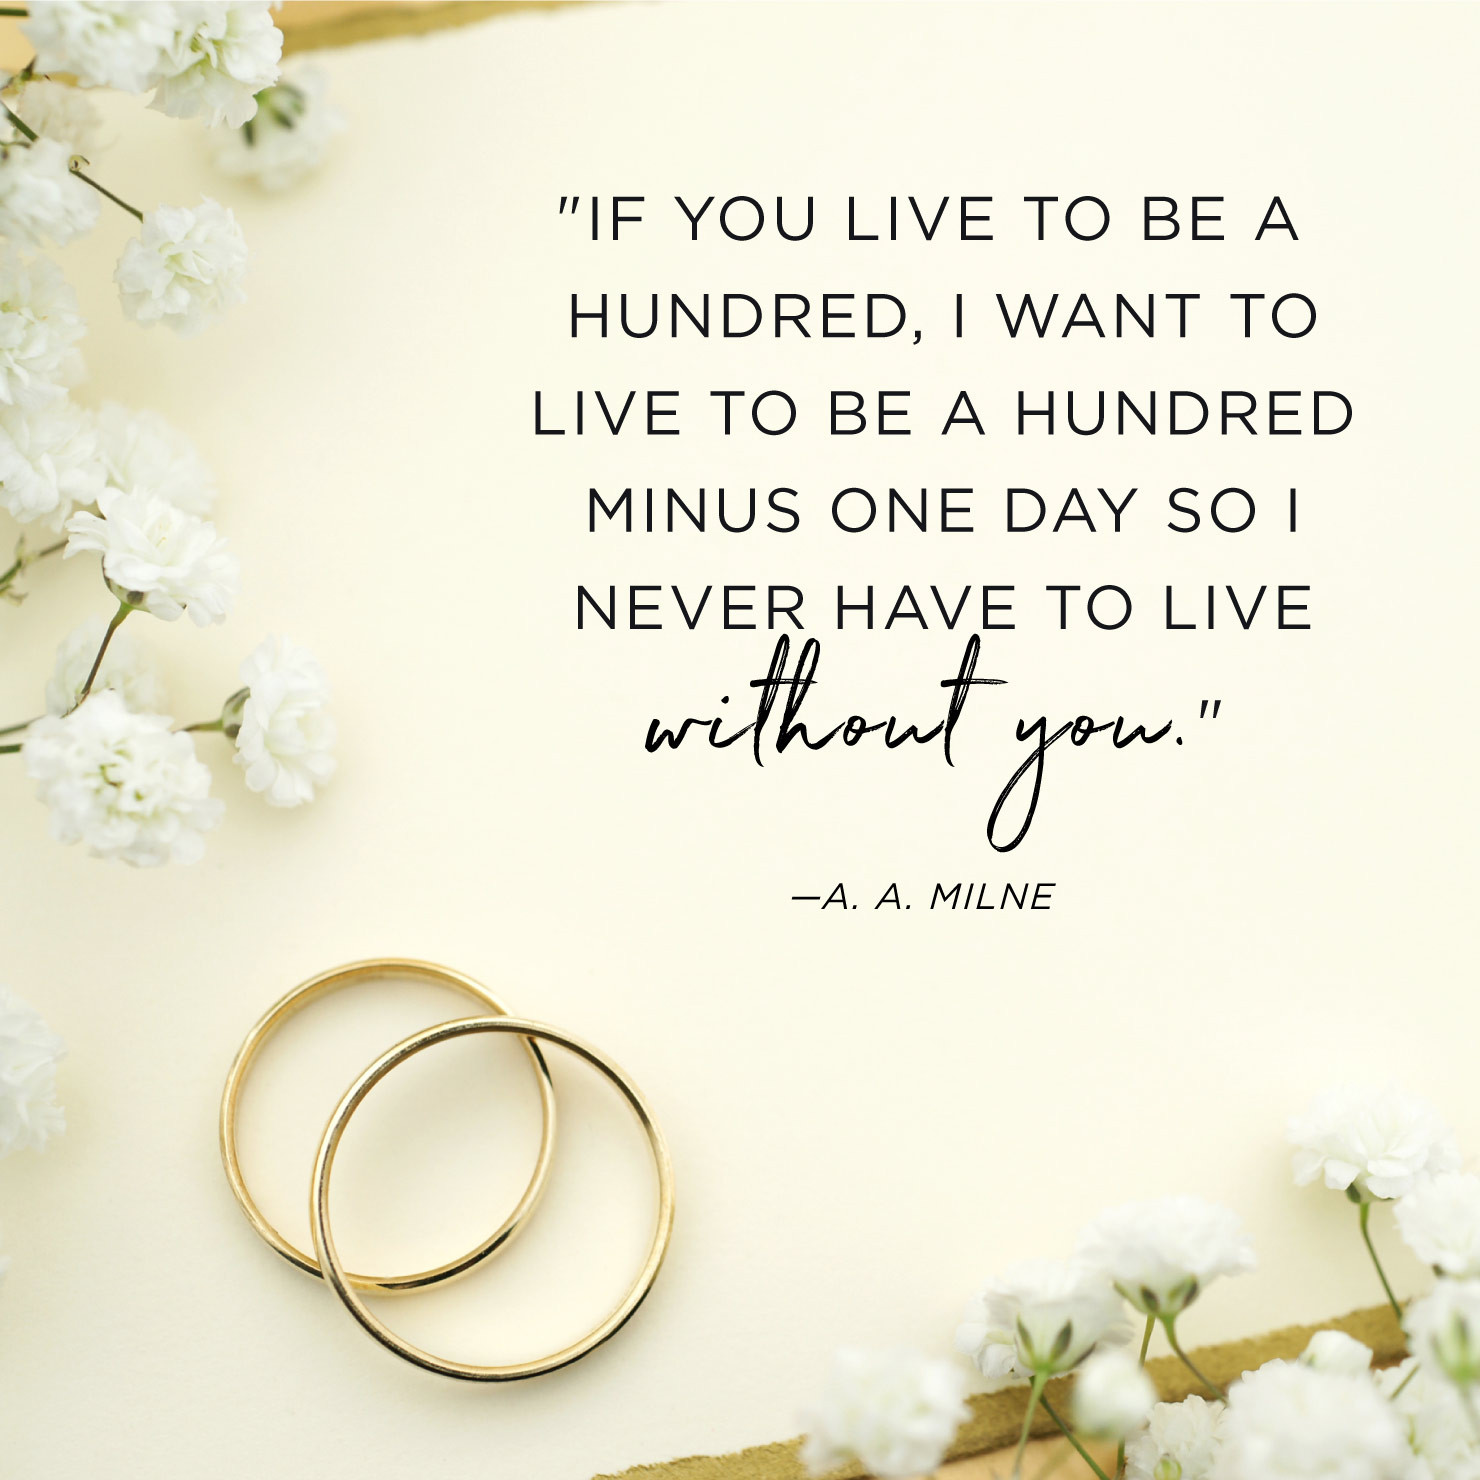 Quotes For Wedding Anniversaries
 60 Happy Anniversary Quotes to Celebrate Your Love